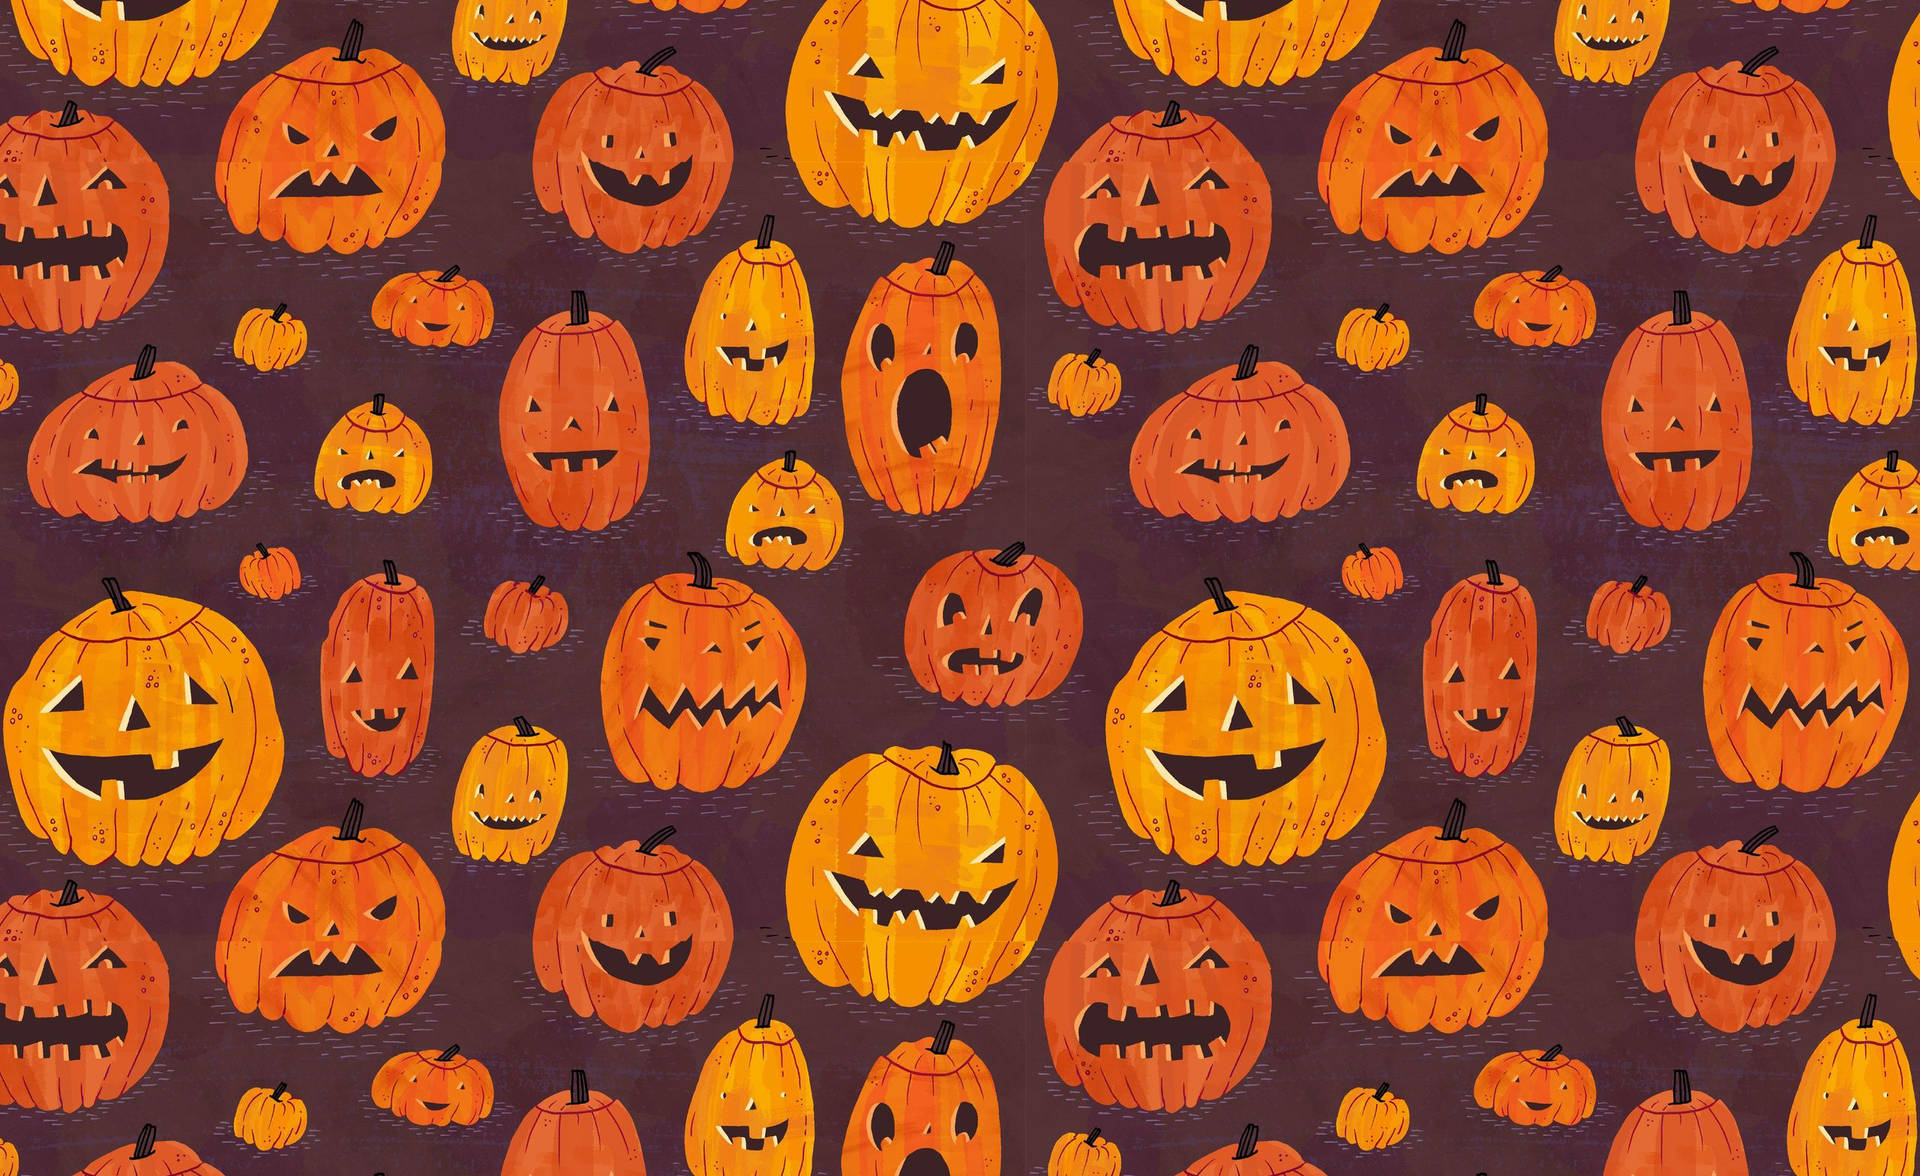 Get into the spooky spirit with this Halloween-themed PC background! Wallpaper